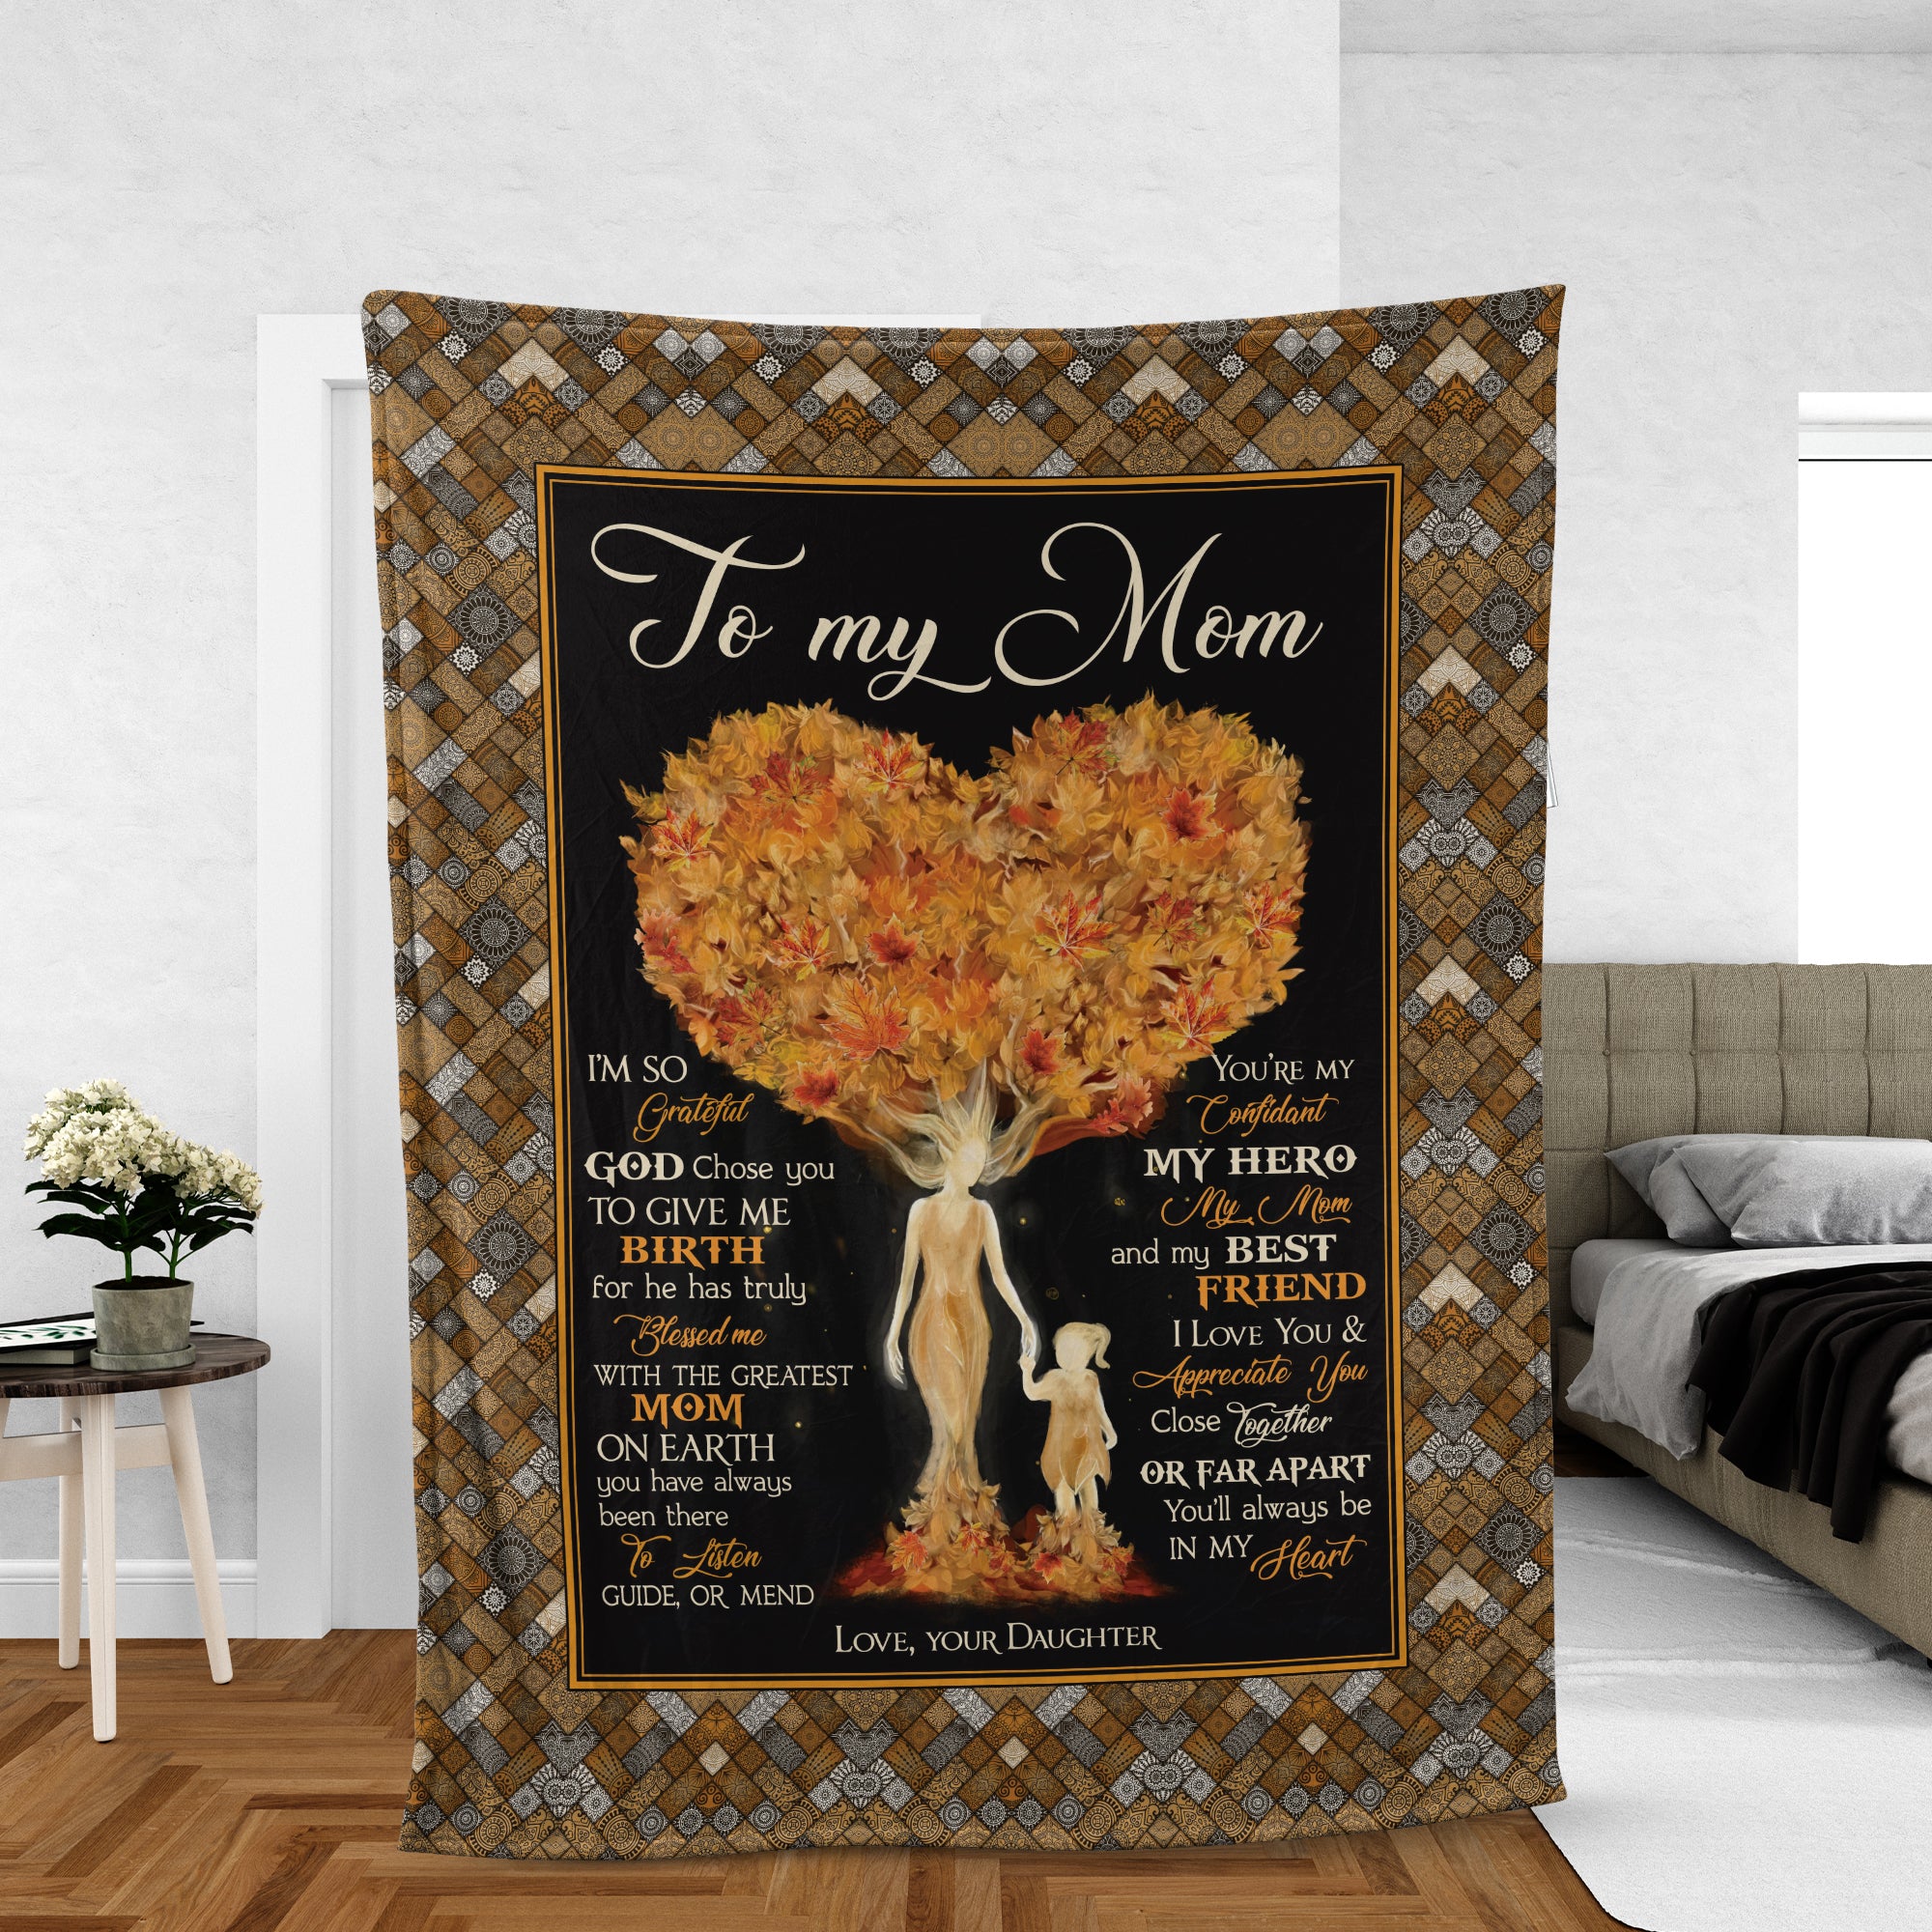 Family Blanket, Daughter And Mom Blanket, Autumn Blanket - Gifts For Mom From Daughter - Holding Hands, Heart Tree, You Will Always Be In My Heart